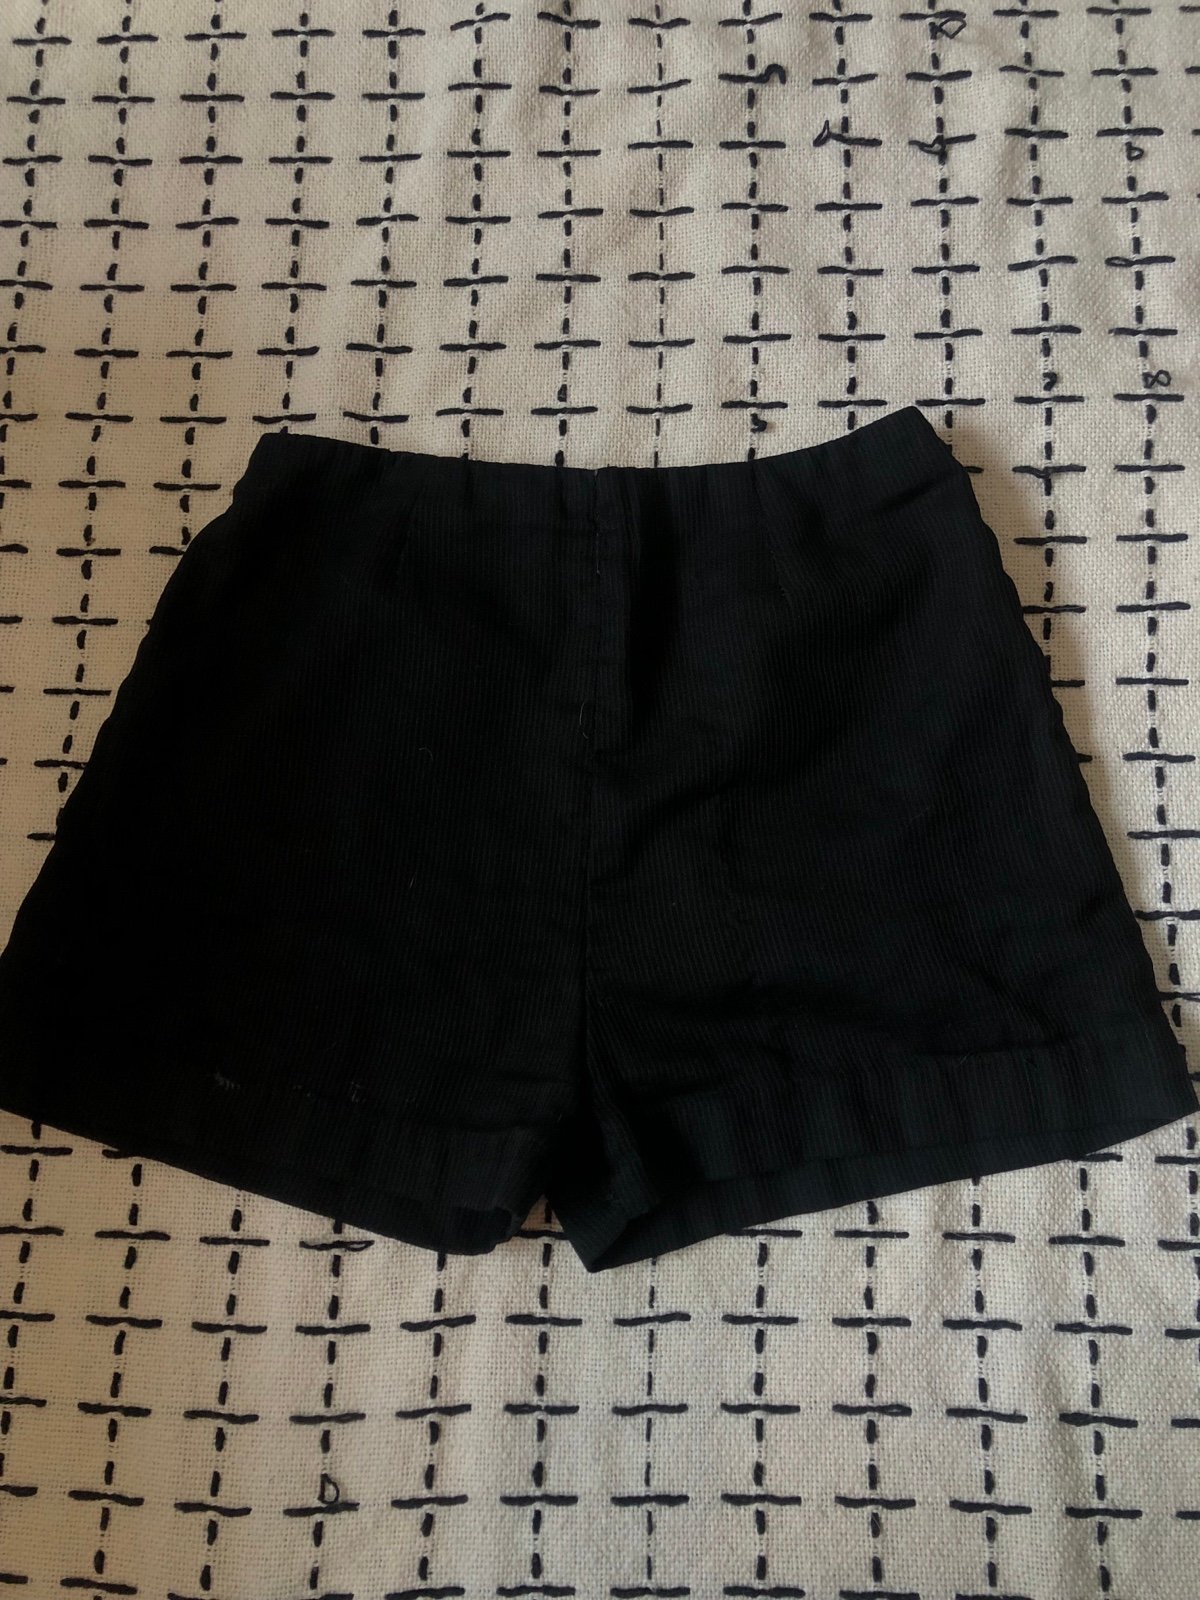 the Lowest price Vintage High Waisted Shorts 24” kgs1RoBjJ Online Exclusive